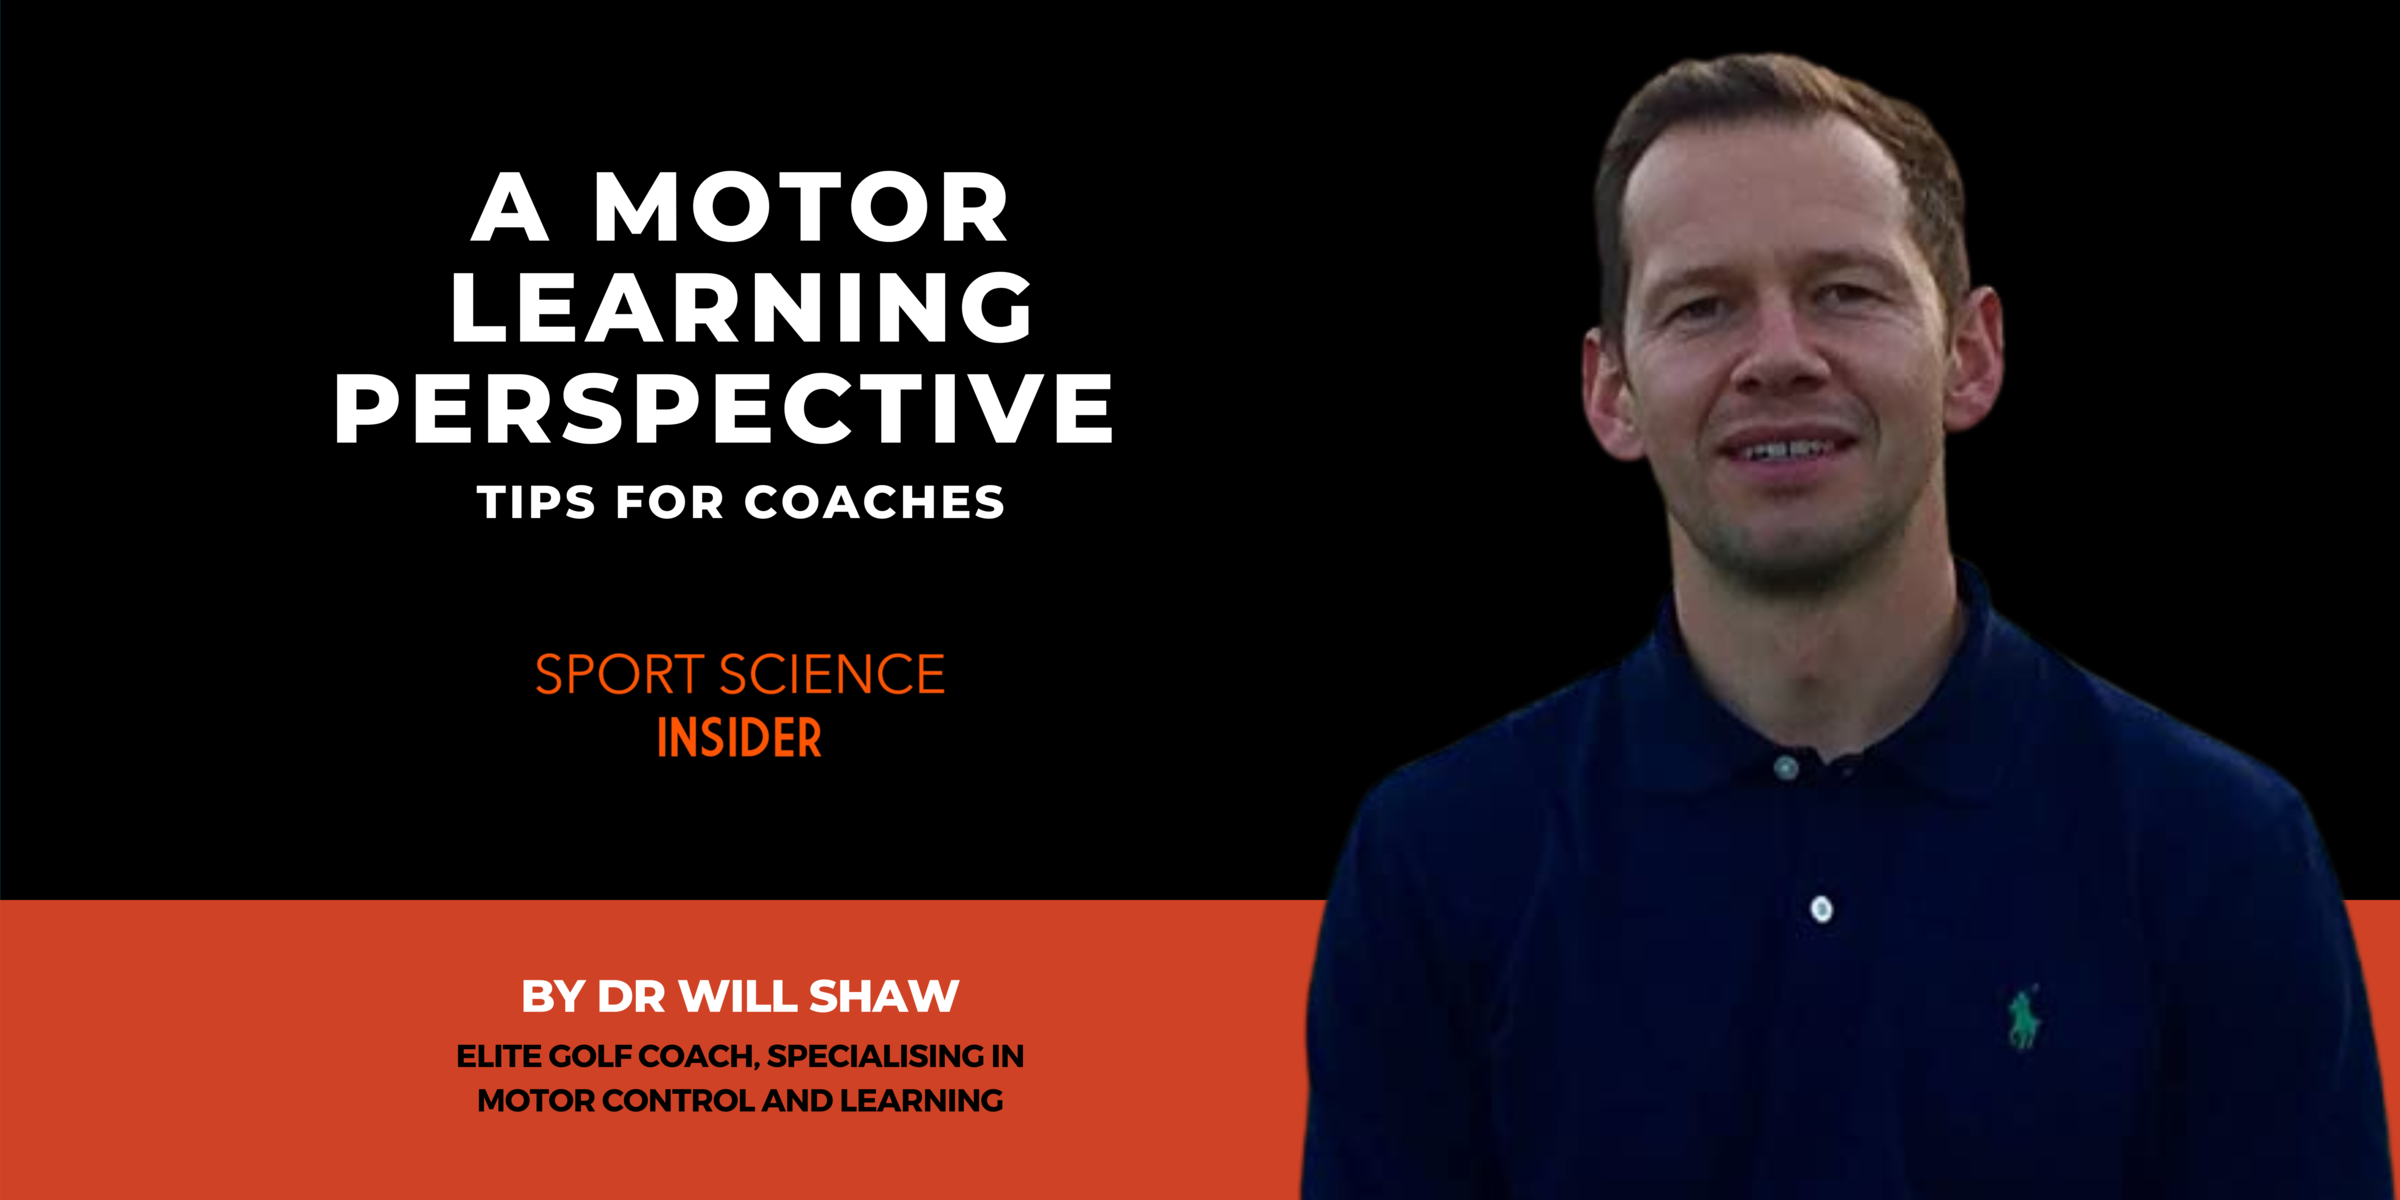 A Motor Learning Perspective By Dr Will Shaw